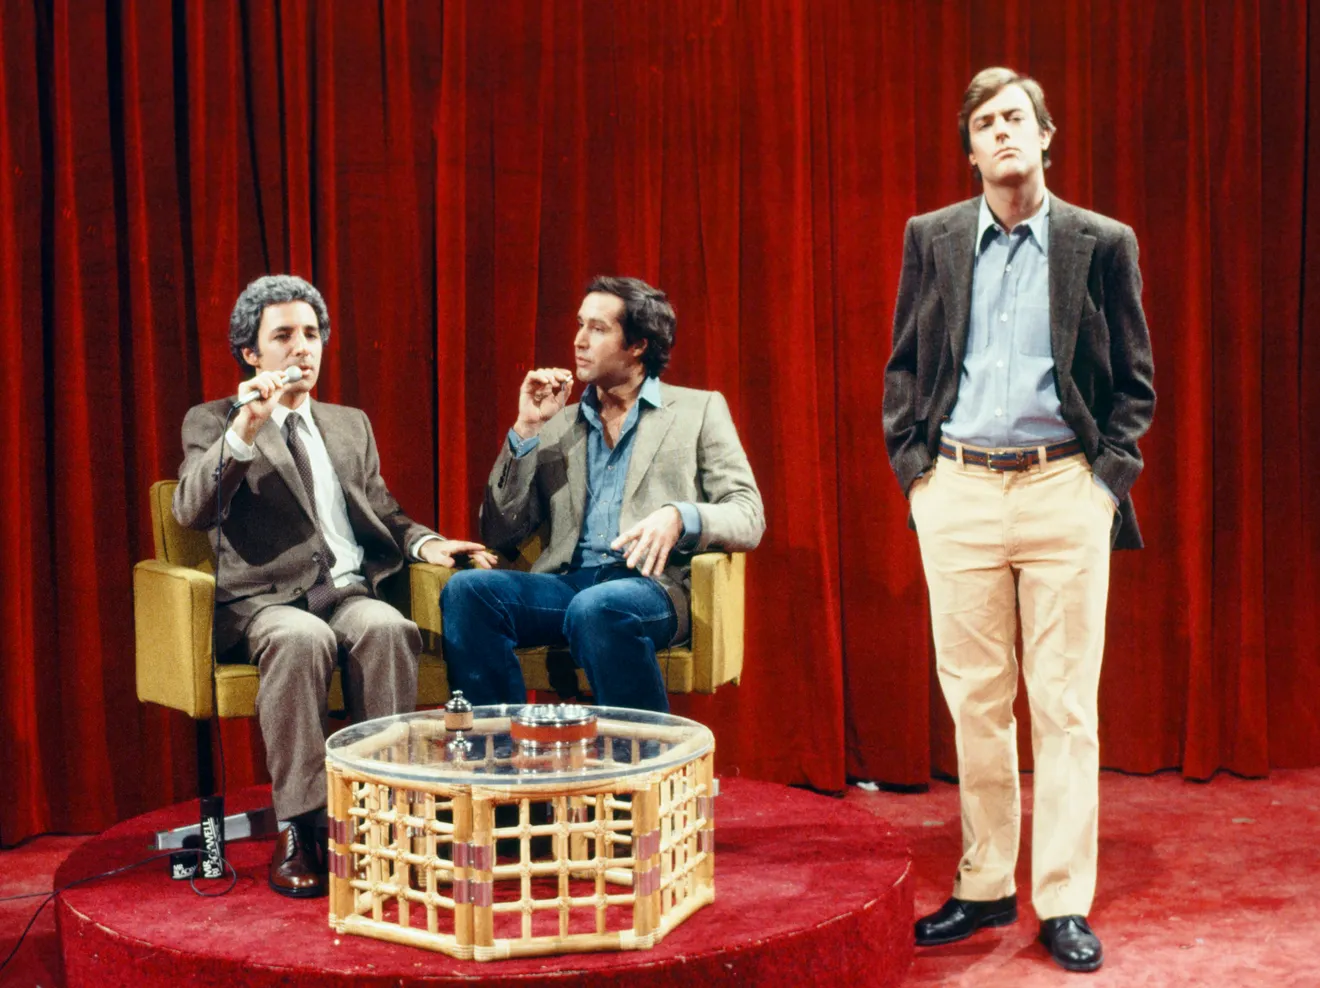 Peter Aykroyd is standing in "Saturday Night Live." while two co cast are sitting on stage.